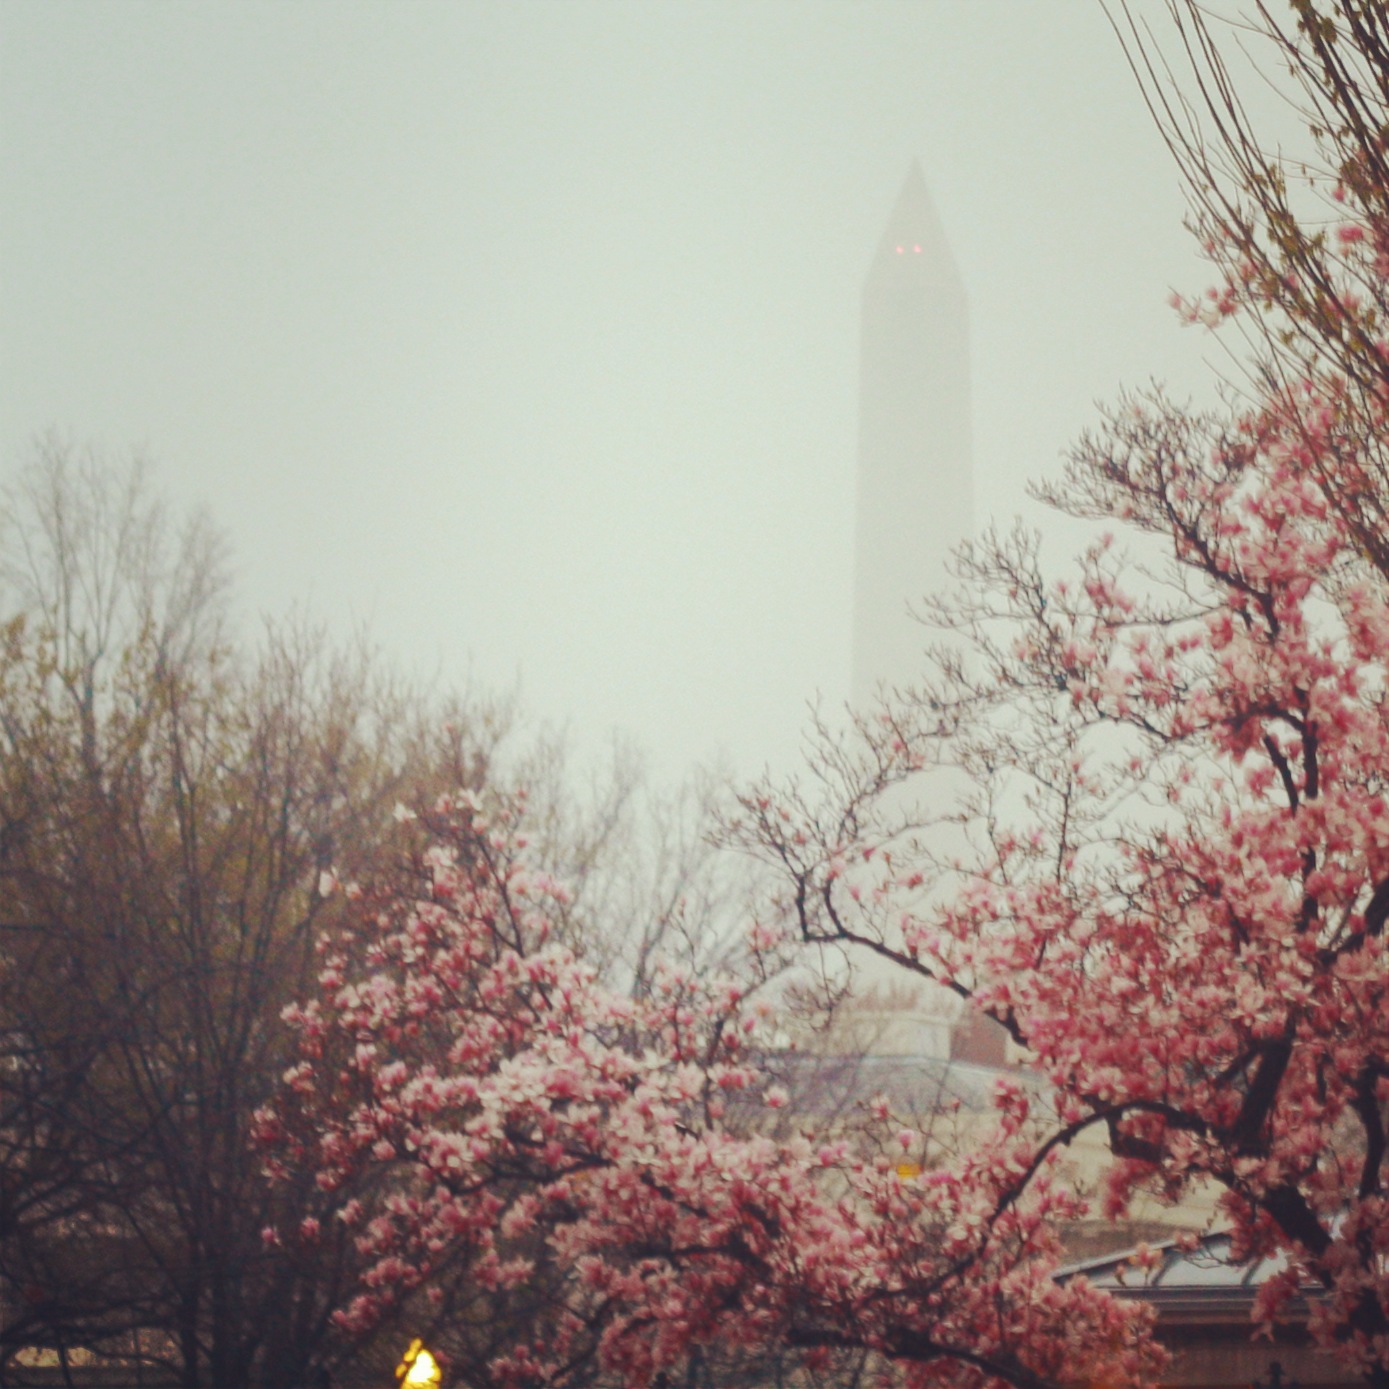 Washington Monument in the background to the rain and cherry blossoms